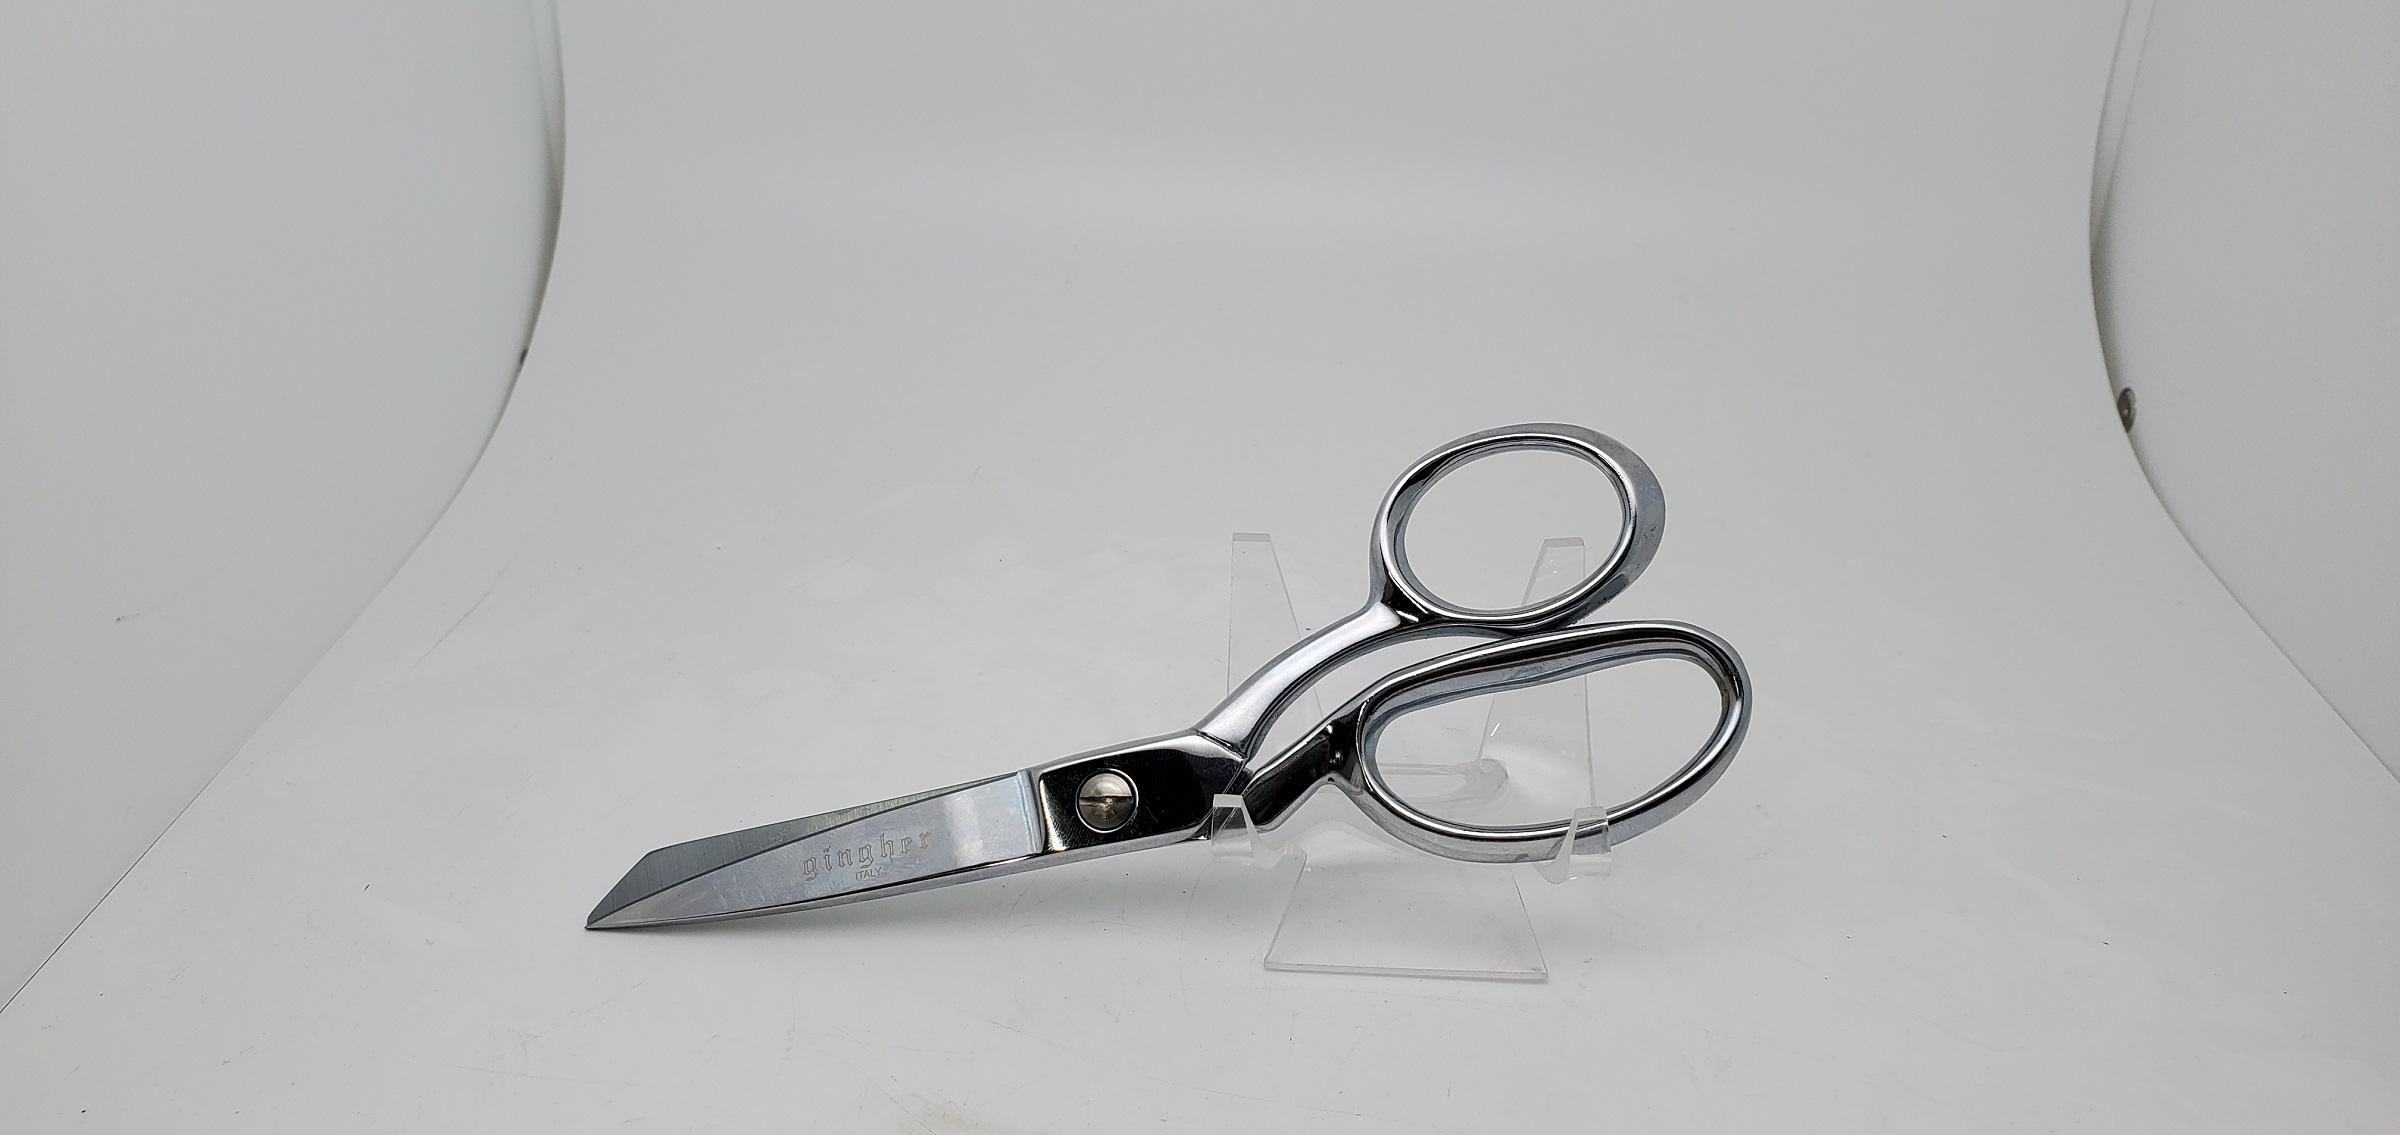 Gingher G-4C 4 Curved Embroidery Scissors -G-4C